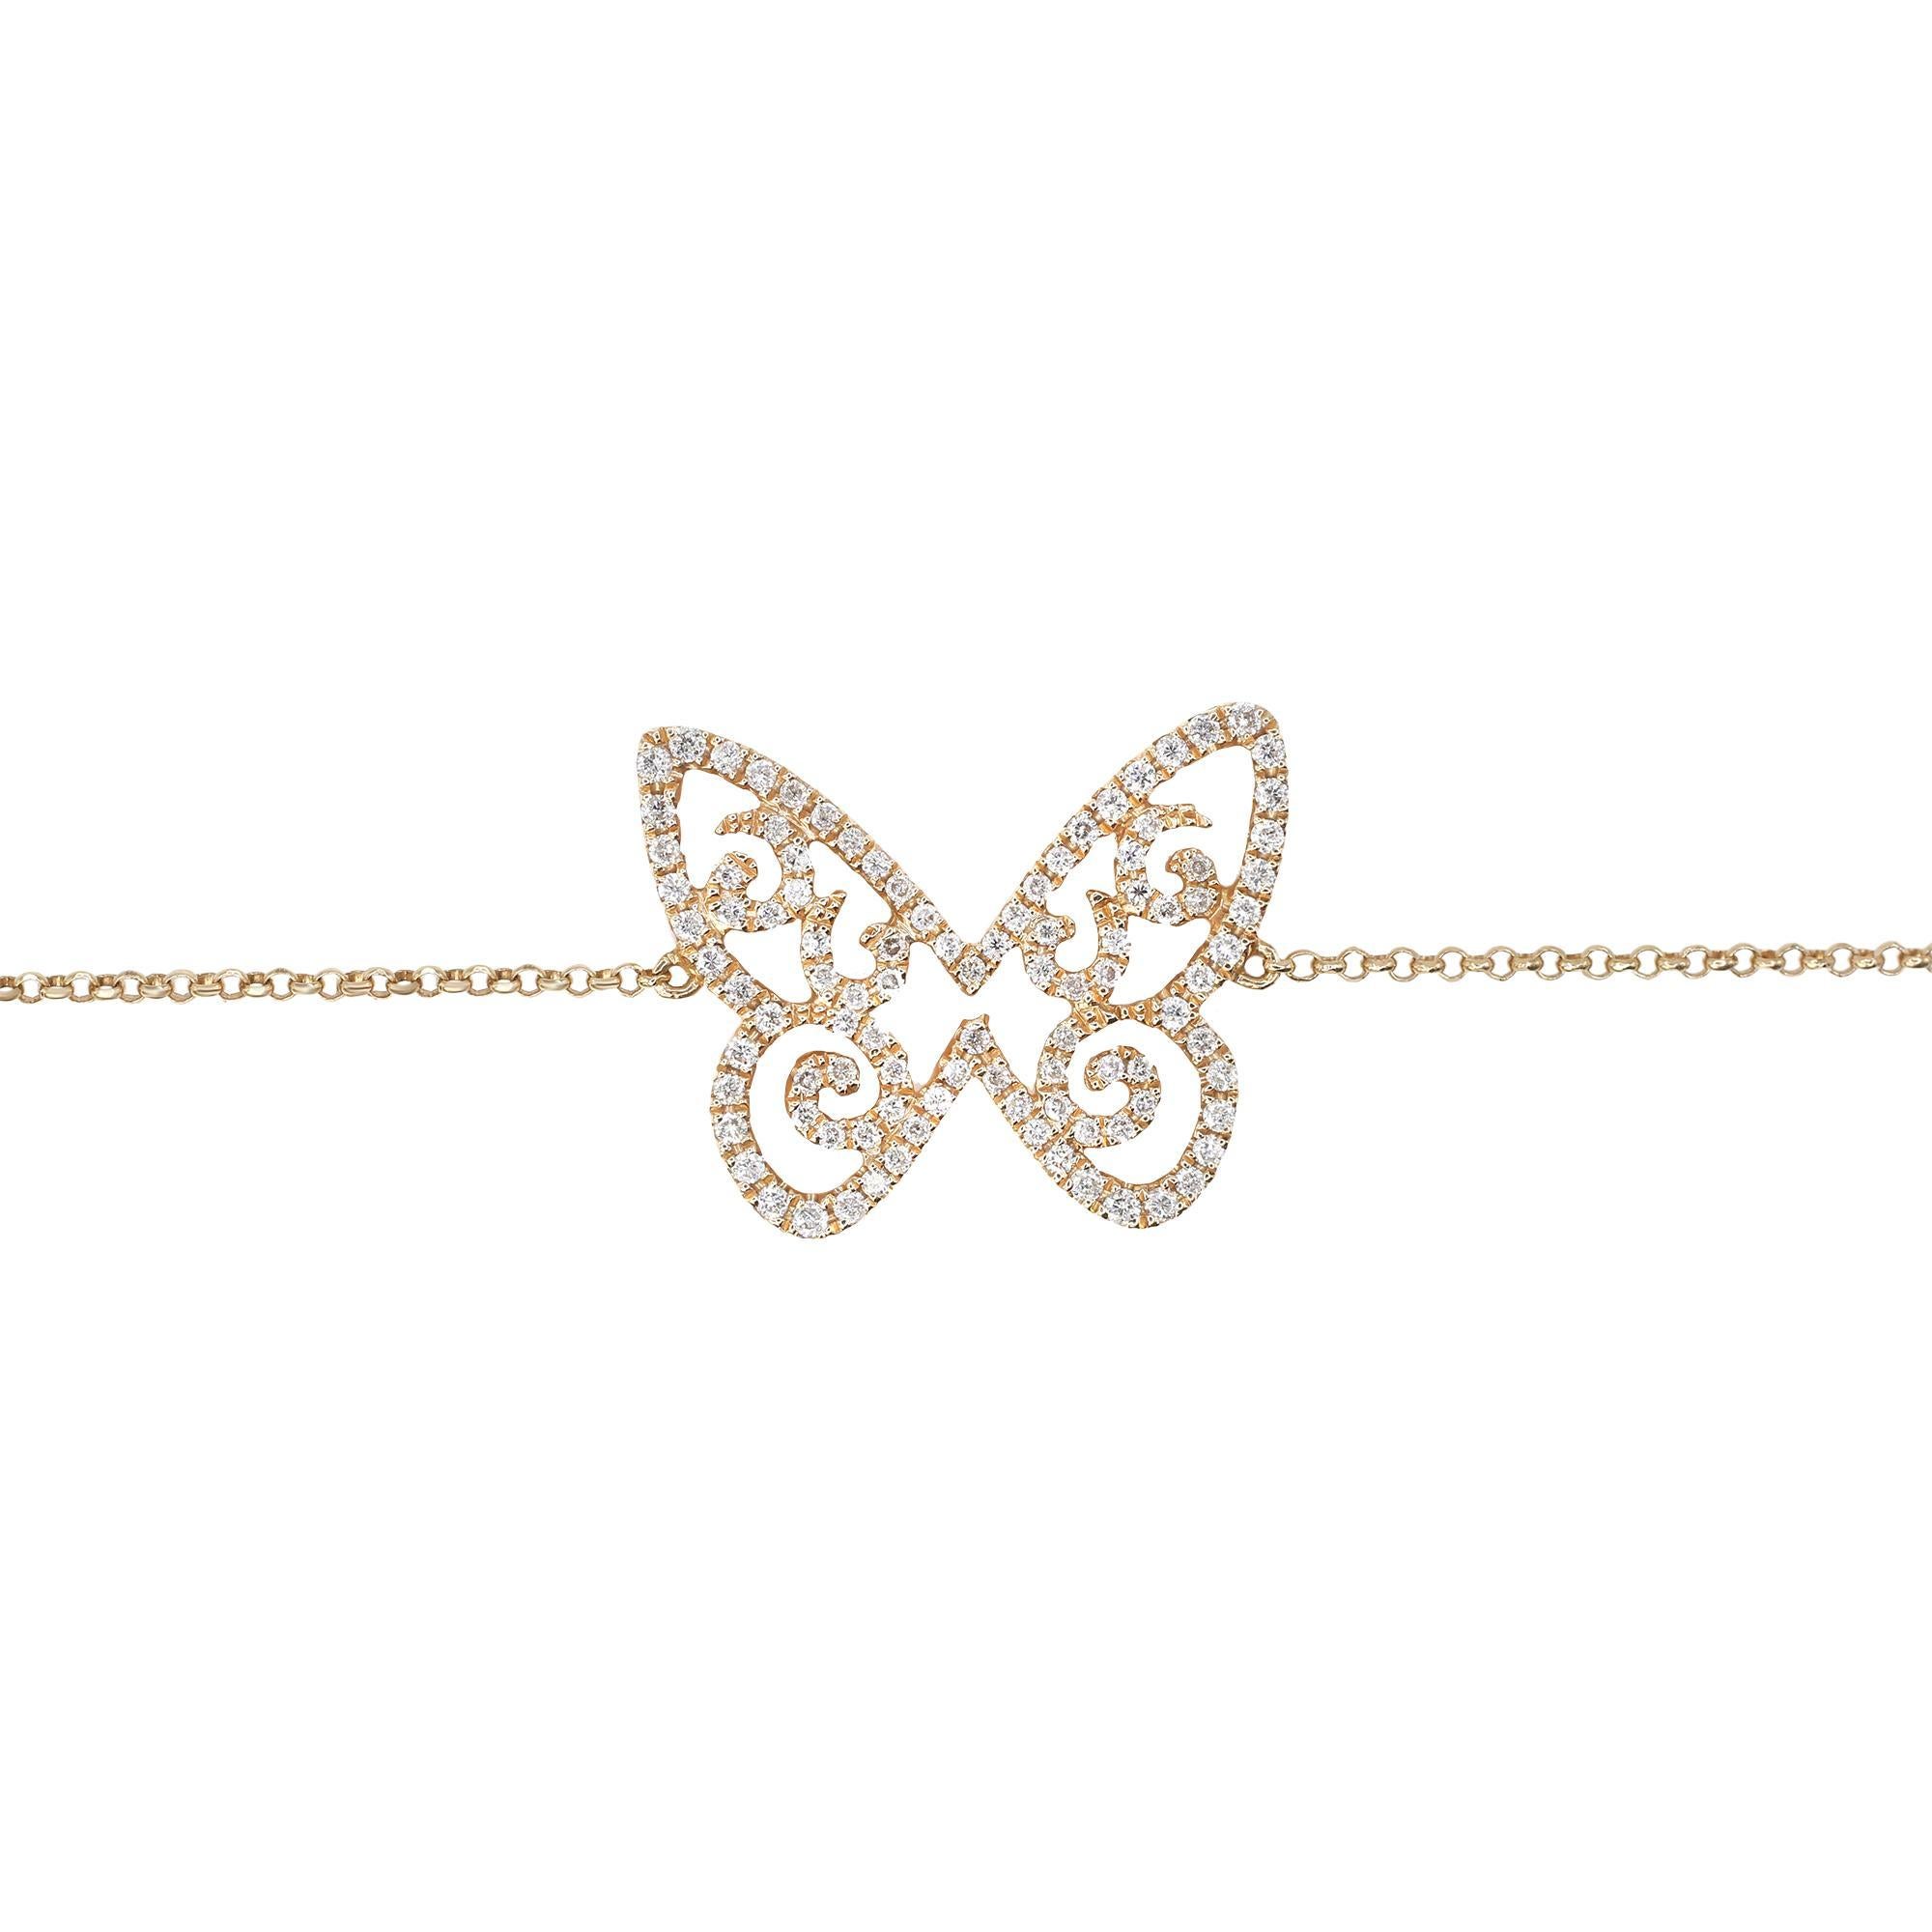 Butterflies are deep & powerful representations of life. Shop our special diamond butterfly chain bracelet  in 18k rose gold. This piece features 0.46cttw of round cut diamonds. Diamond color I and SI-I clarity. Length: 7.25 inches. Adjustable